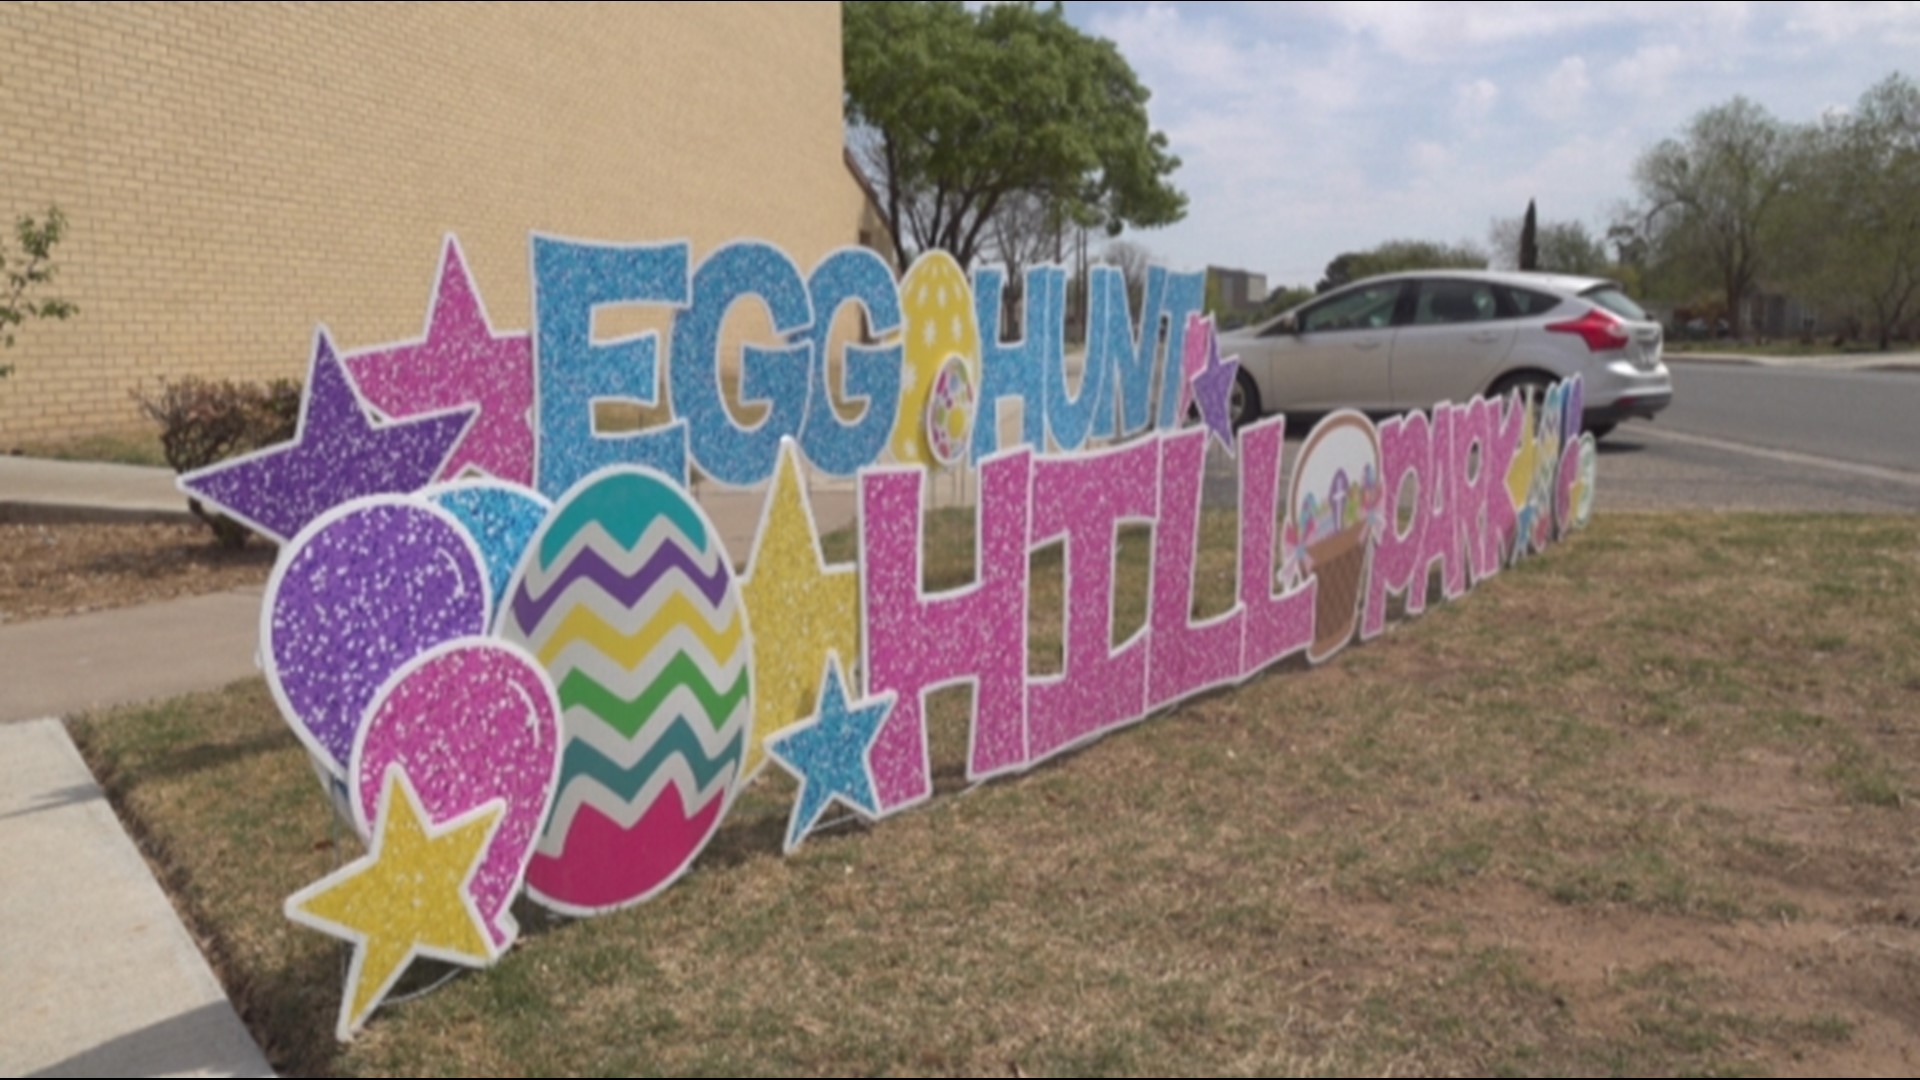 Plenty of family-friendly events are happening in both Midland and Odessa over the weekend.